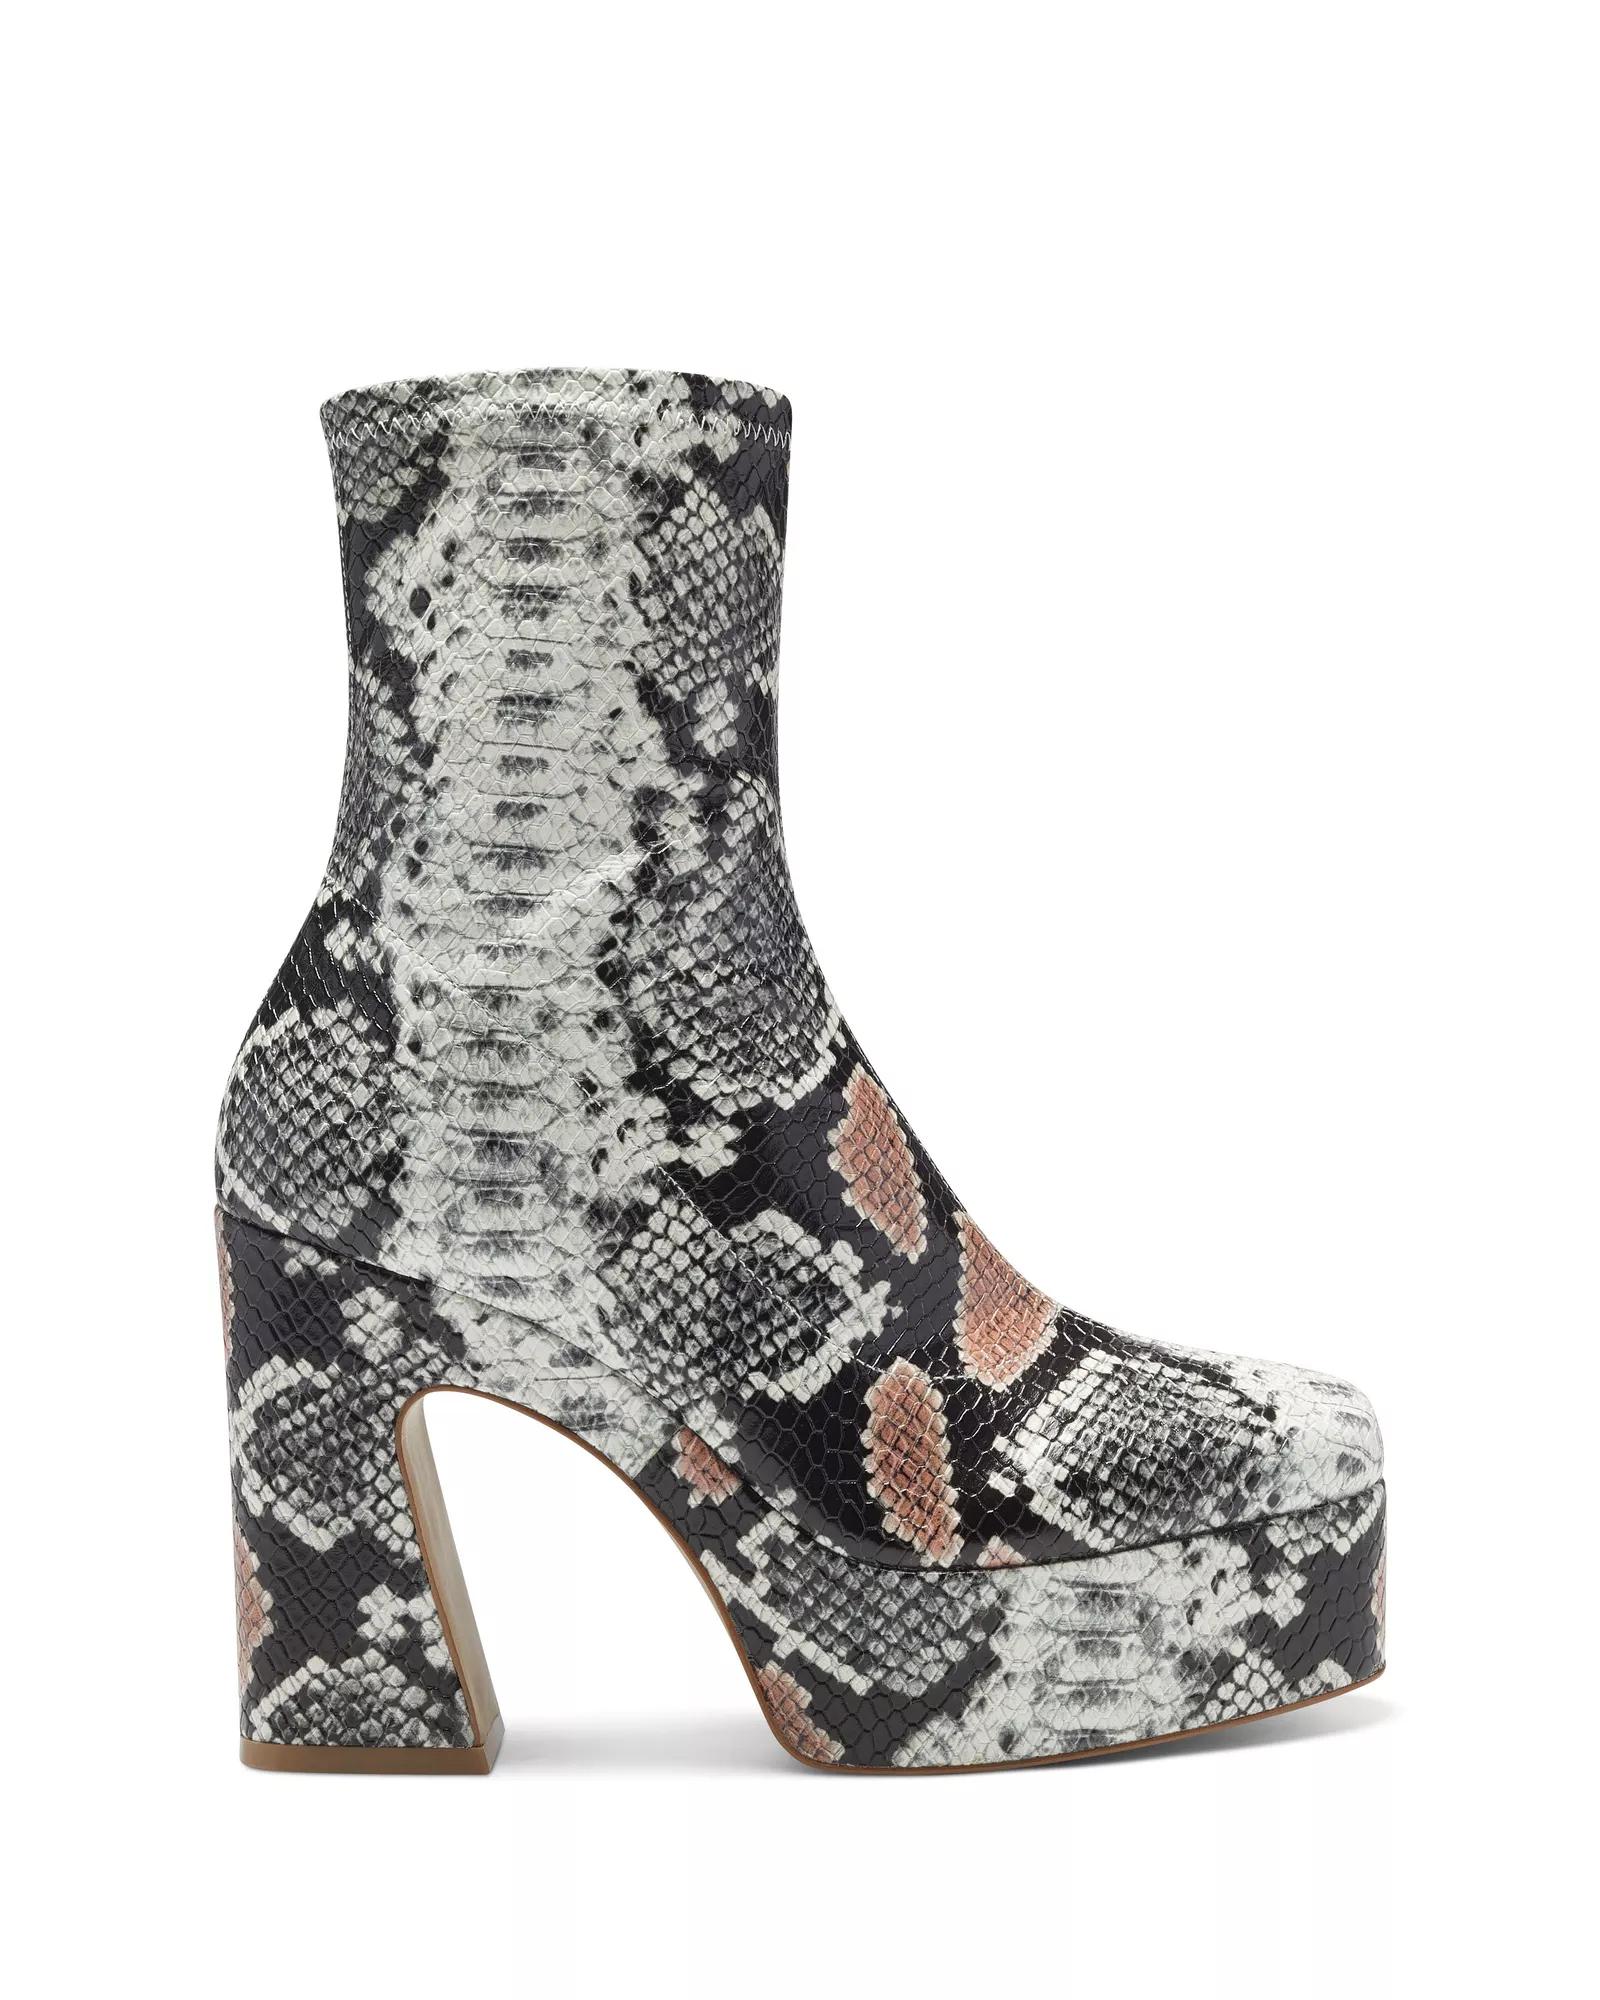 Shoes, Handbags, and Apparel From Vince Camuto